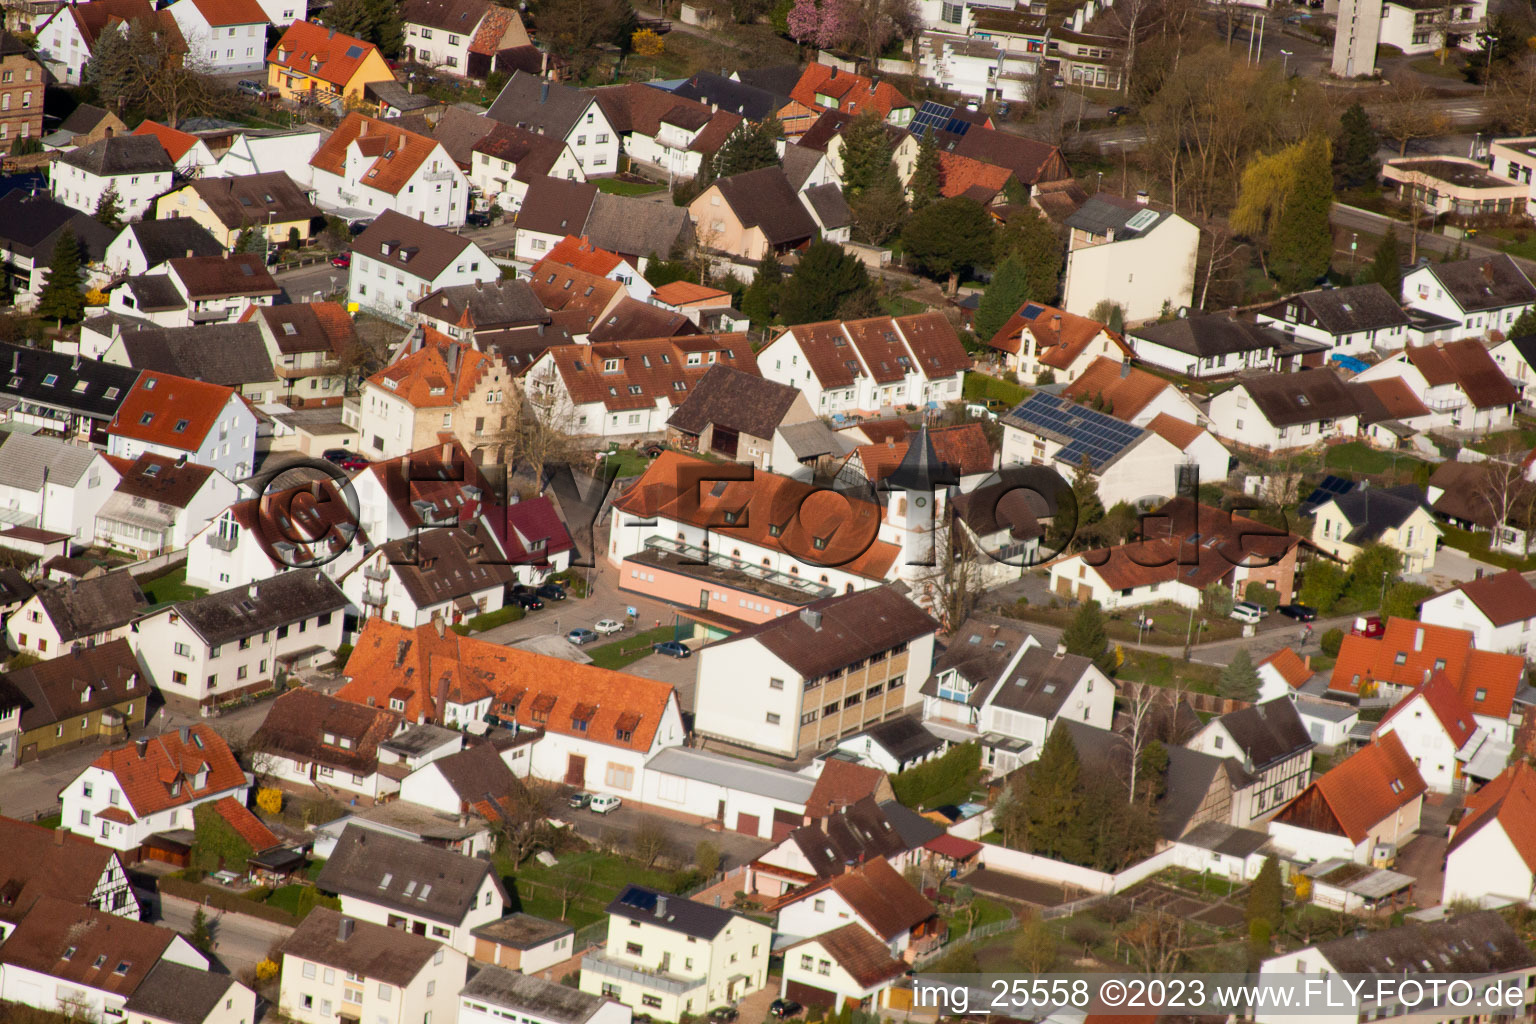 Drone image of Elchesheim in the state Baden-Wuerttemberg, Germany